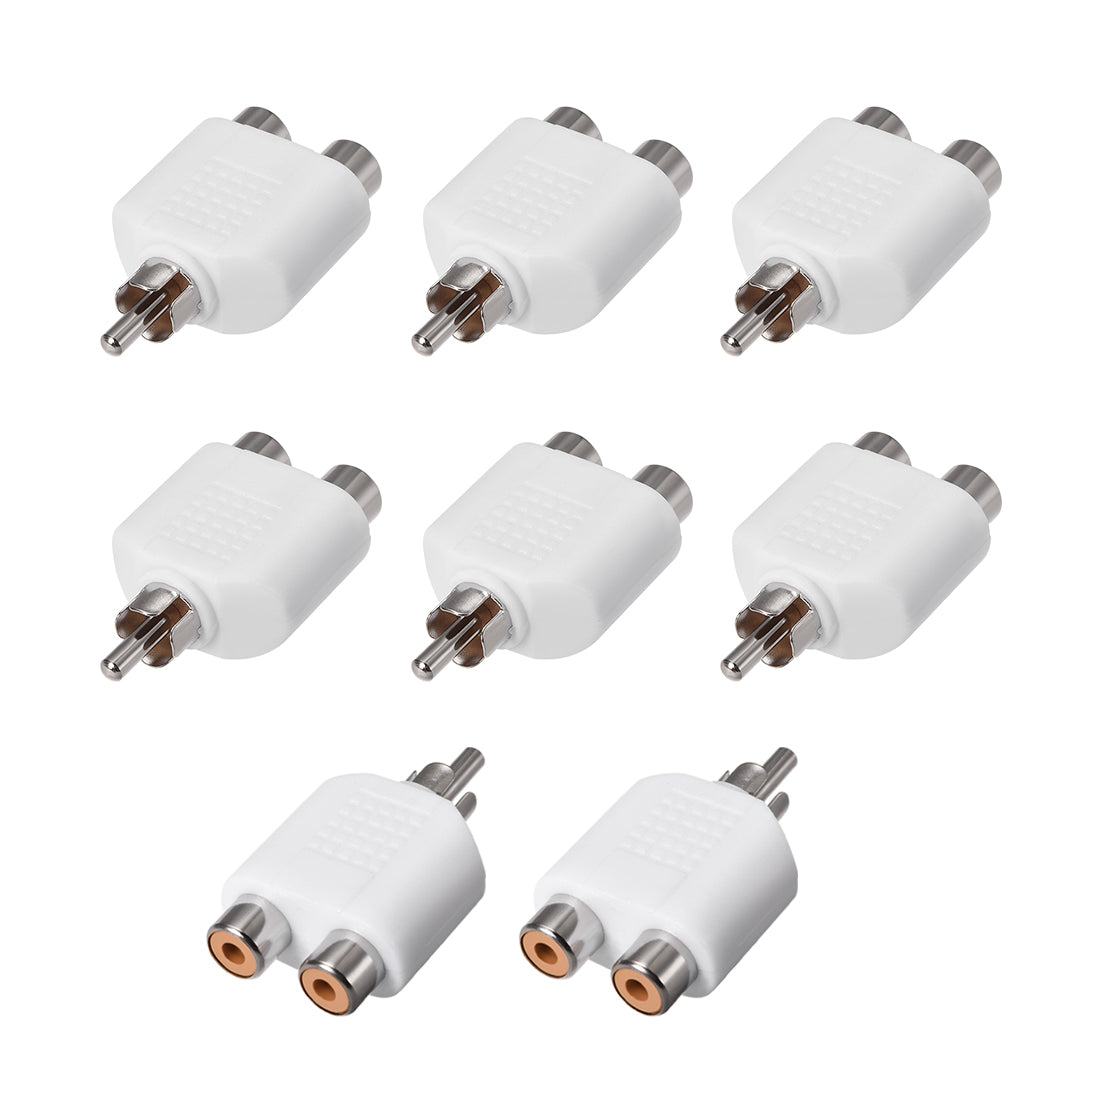 uxcell Uxcell RCA Male to 2 RCA Female Connector Splitter Adapter Coupler White 8Pcs for Stereo Audio Video AV TV Cable Convert